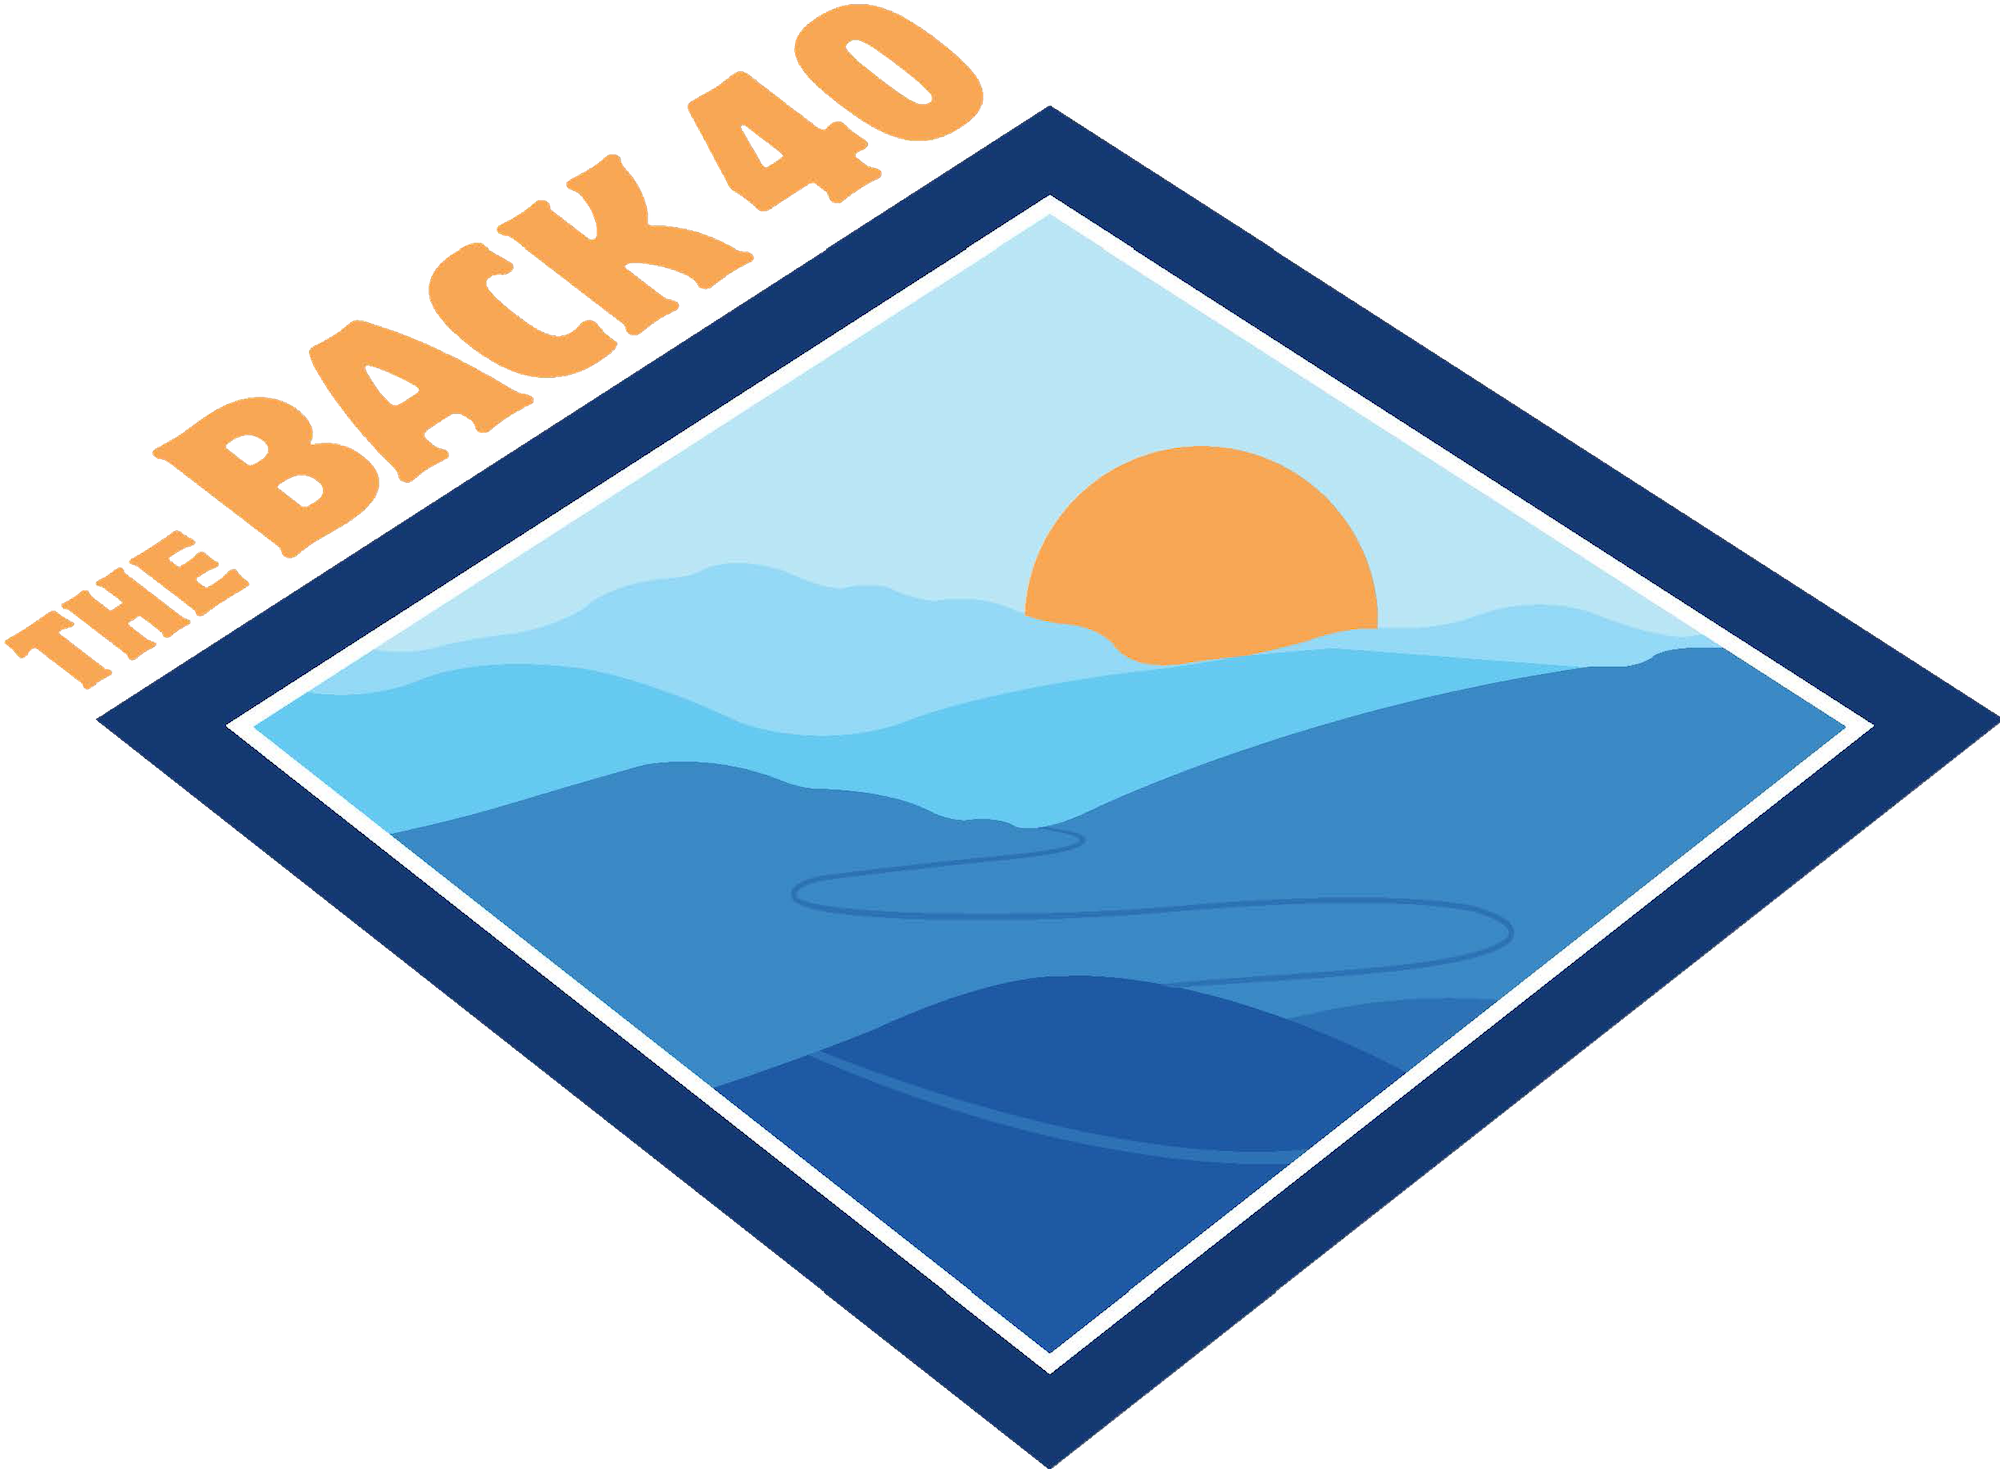 hiking clipart mountain slope